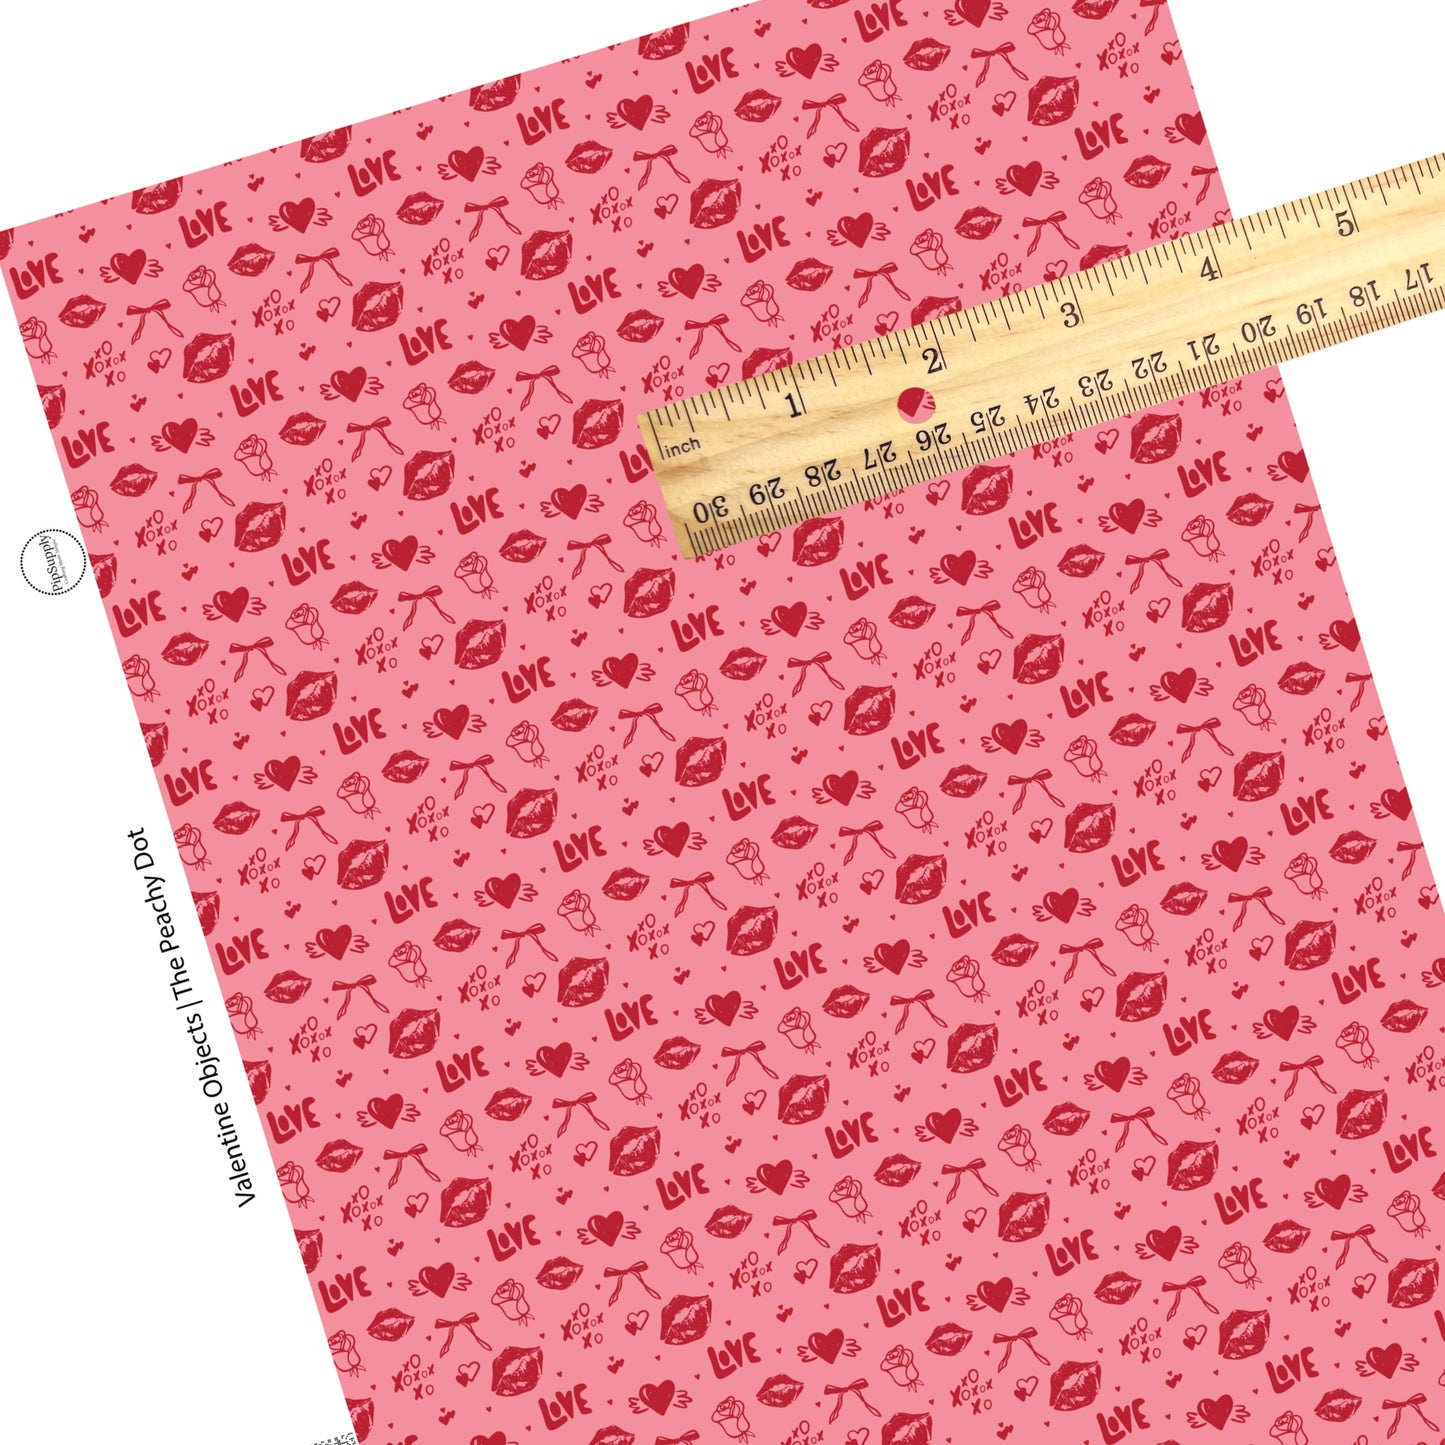 These Valentine's pattern themed faux leather sheets contain the following design elements: red kisses, bows, hearts, and Valentine sayings on pink. Our CPSIA compliant faux leather sheets or rolls can be used for all types of crafting projects.